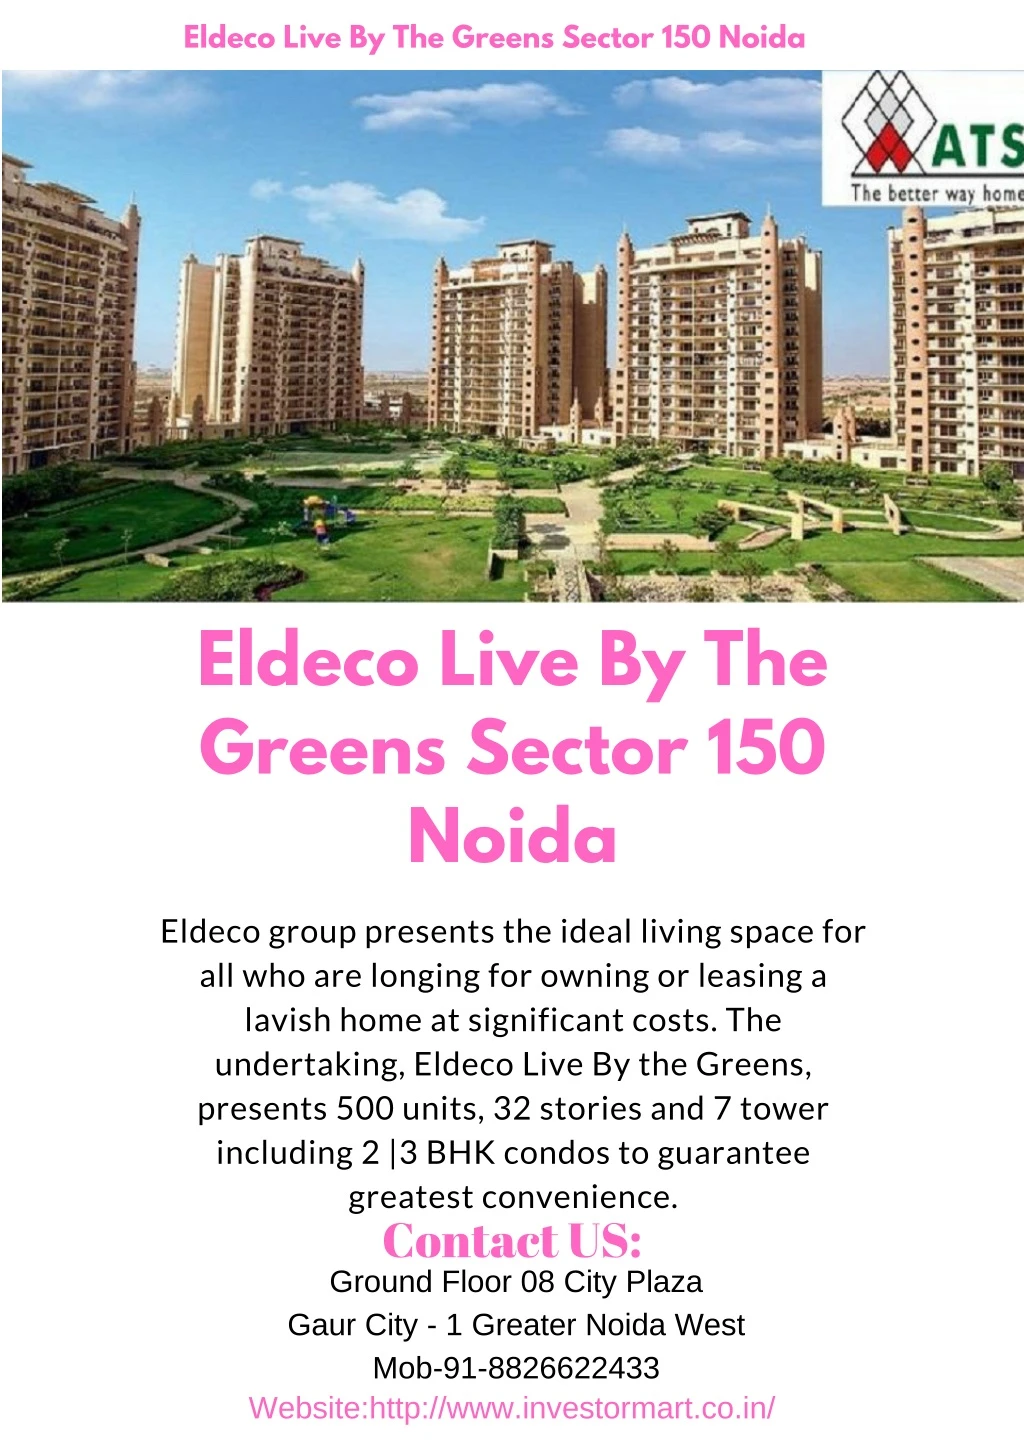 eldeco live by the greens sector 150 noida